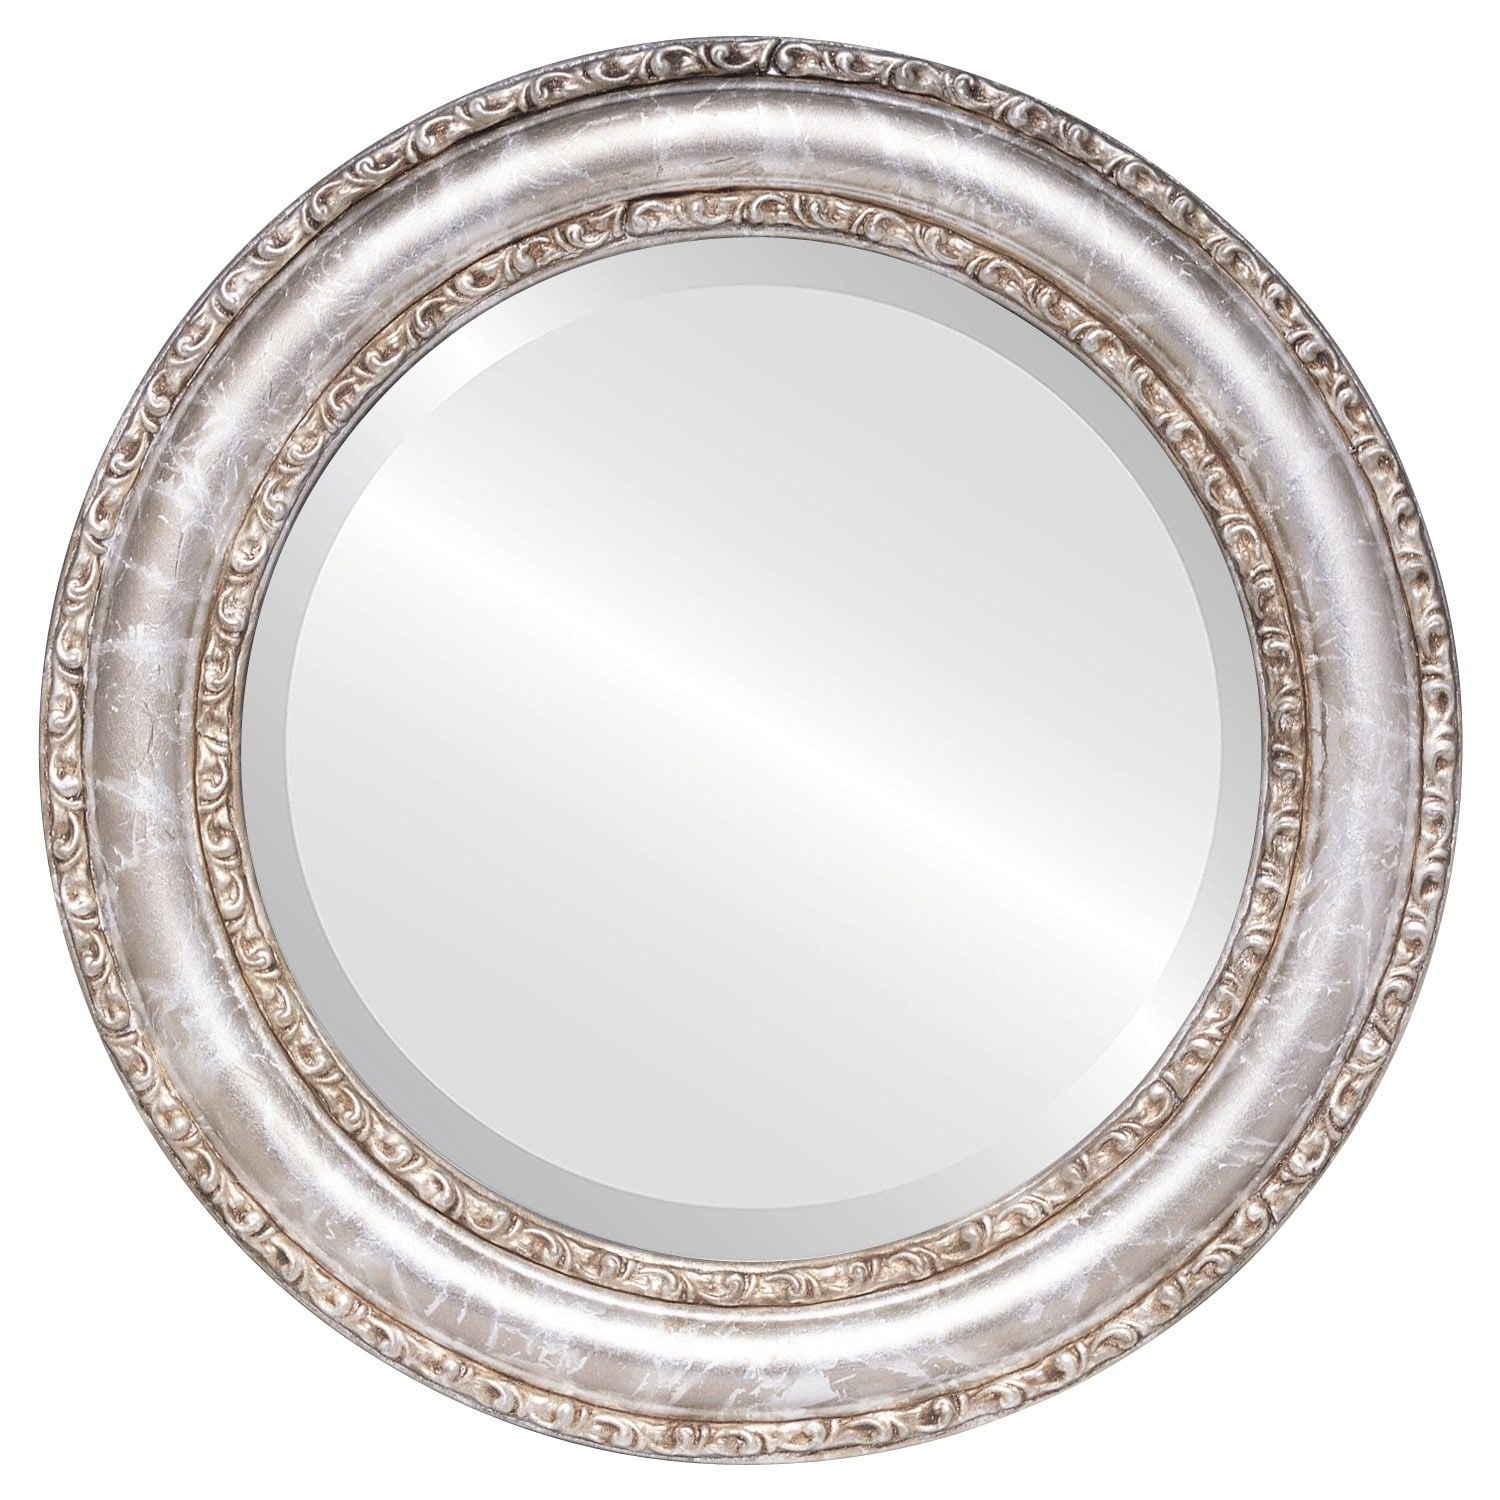 Dorset Framed Round Mirror In Champagne Silver – Antique Antique Silver Pertaining To Antique Gold Leaf Round Oversized Wall Mirrors (View 7 of 15)